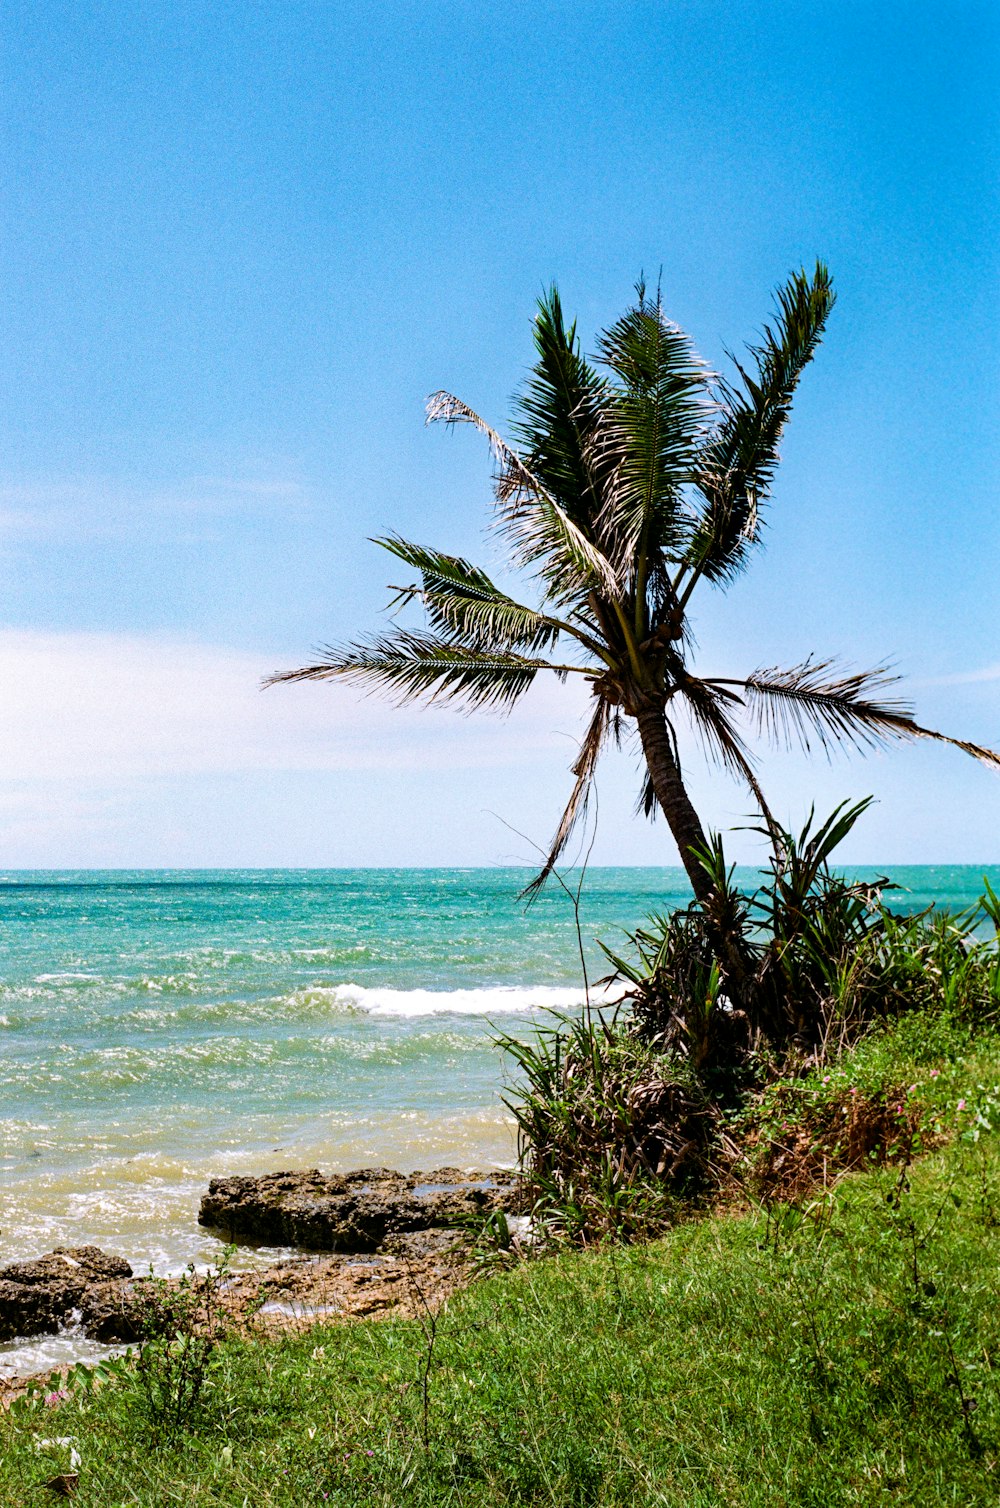 a palm tree on the shore of the ocean